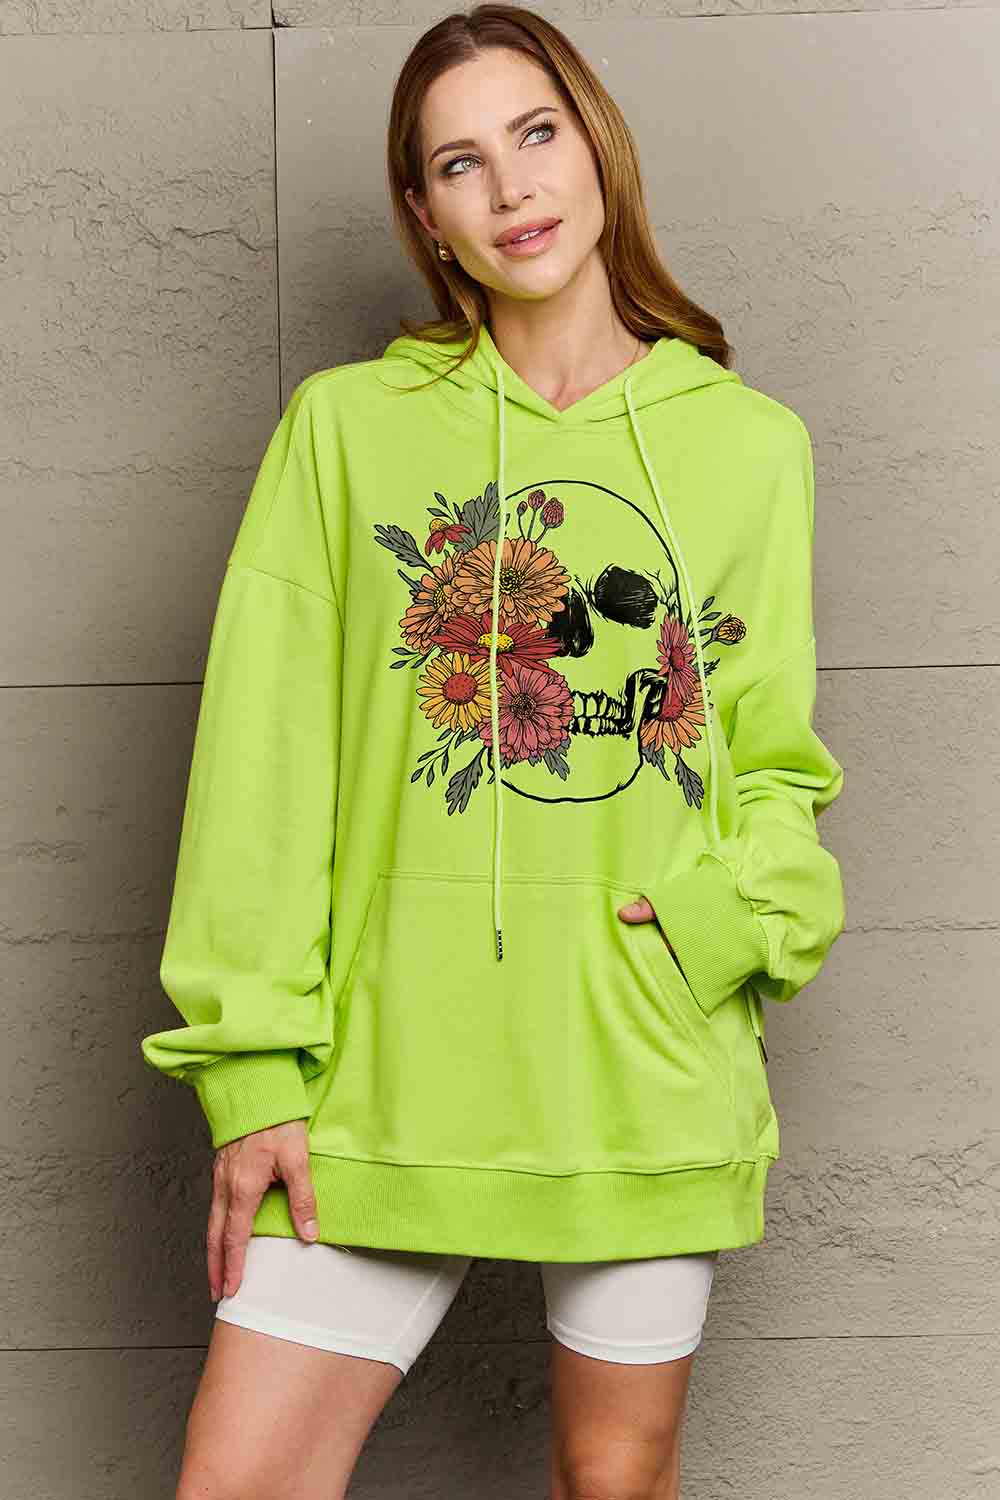 Full Size Floral Skull Graphic Hoodie